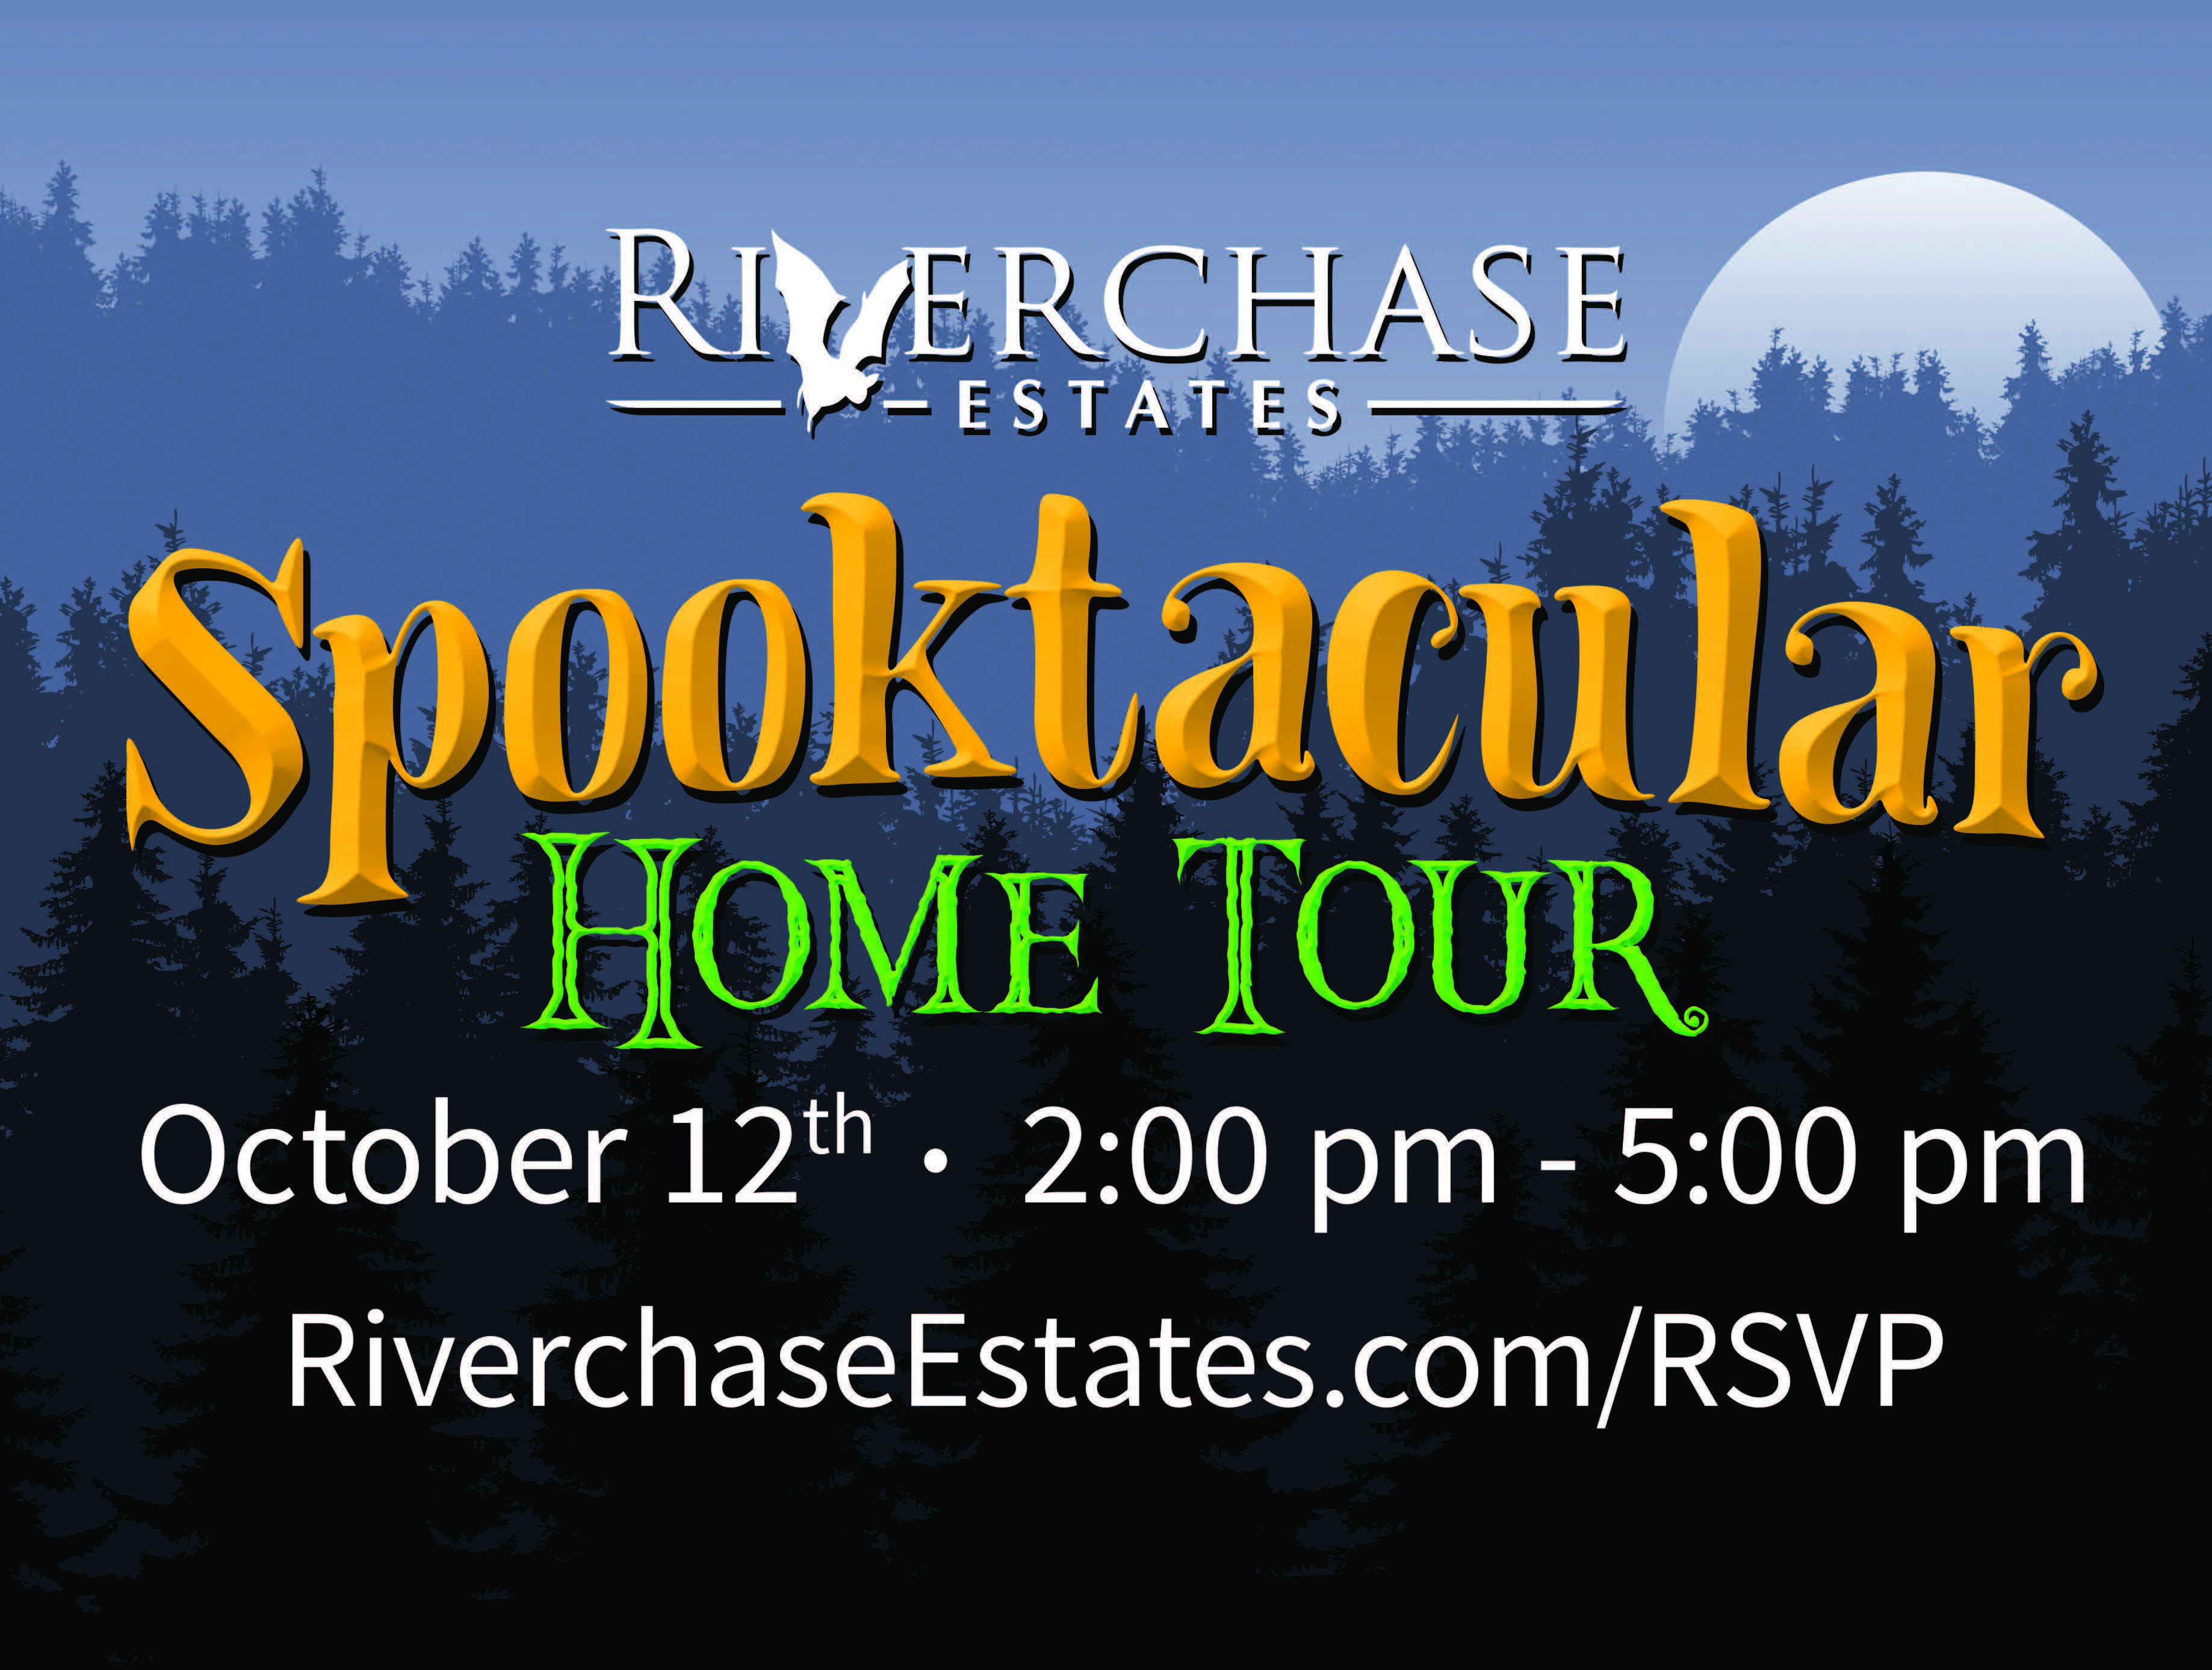 The Riverchase Estates Spooktacular Home Tour – Saturday, October 12th